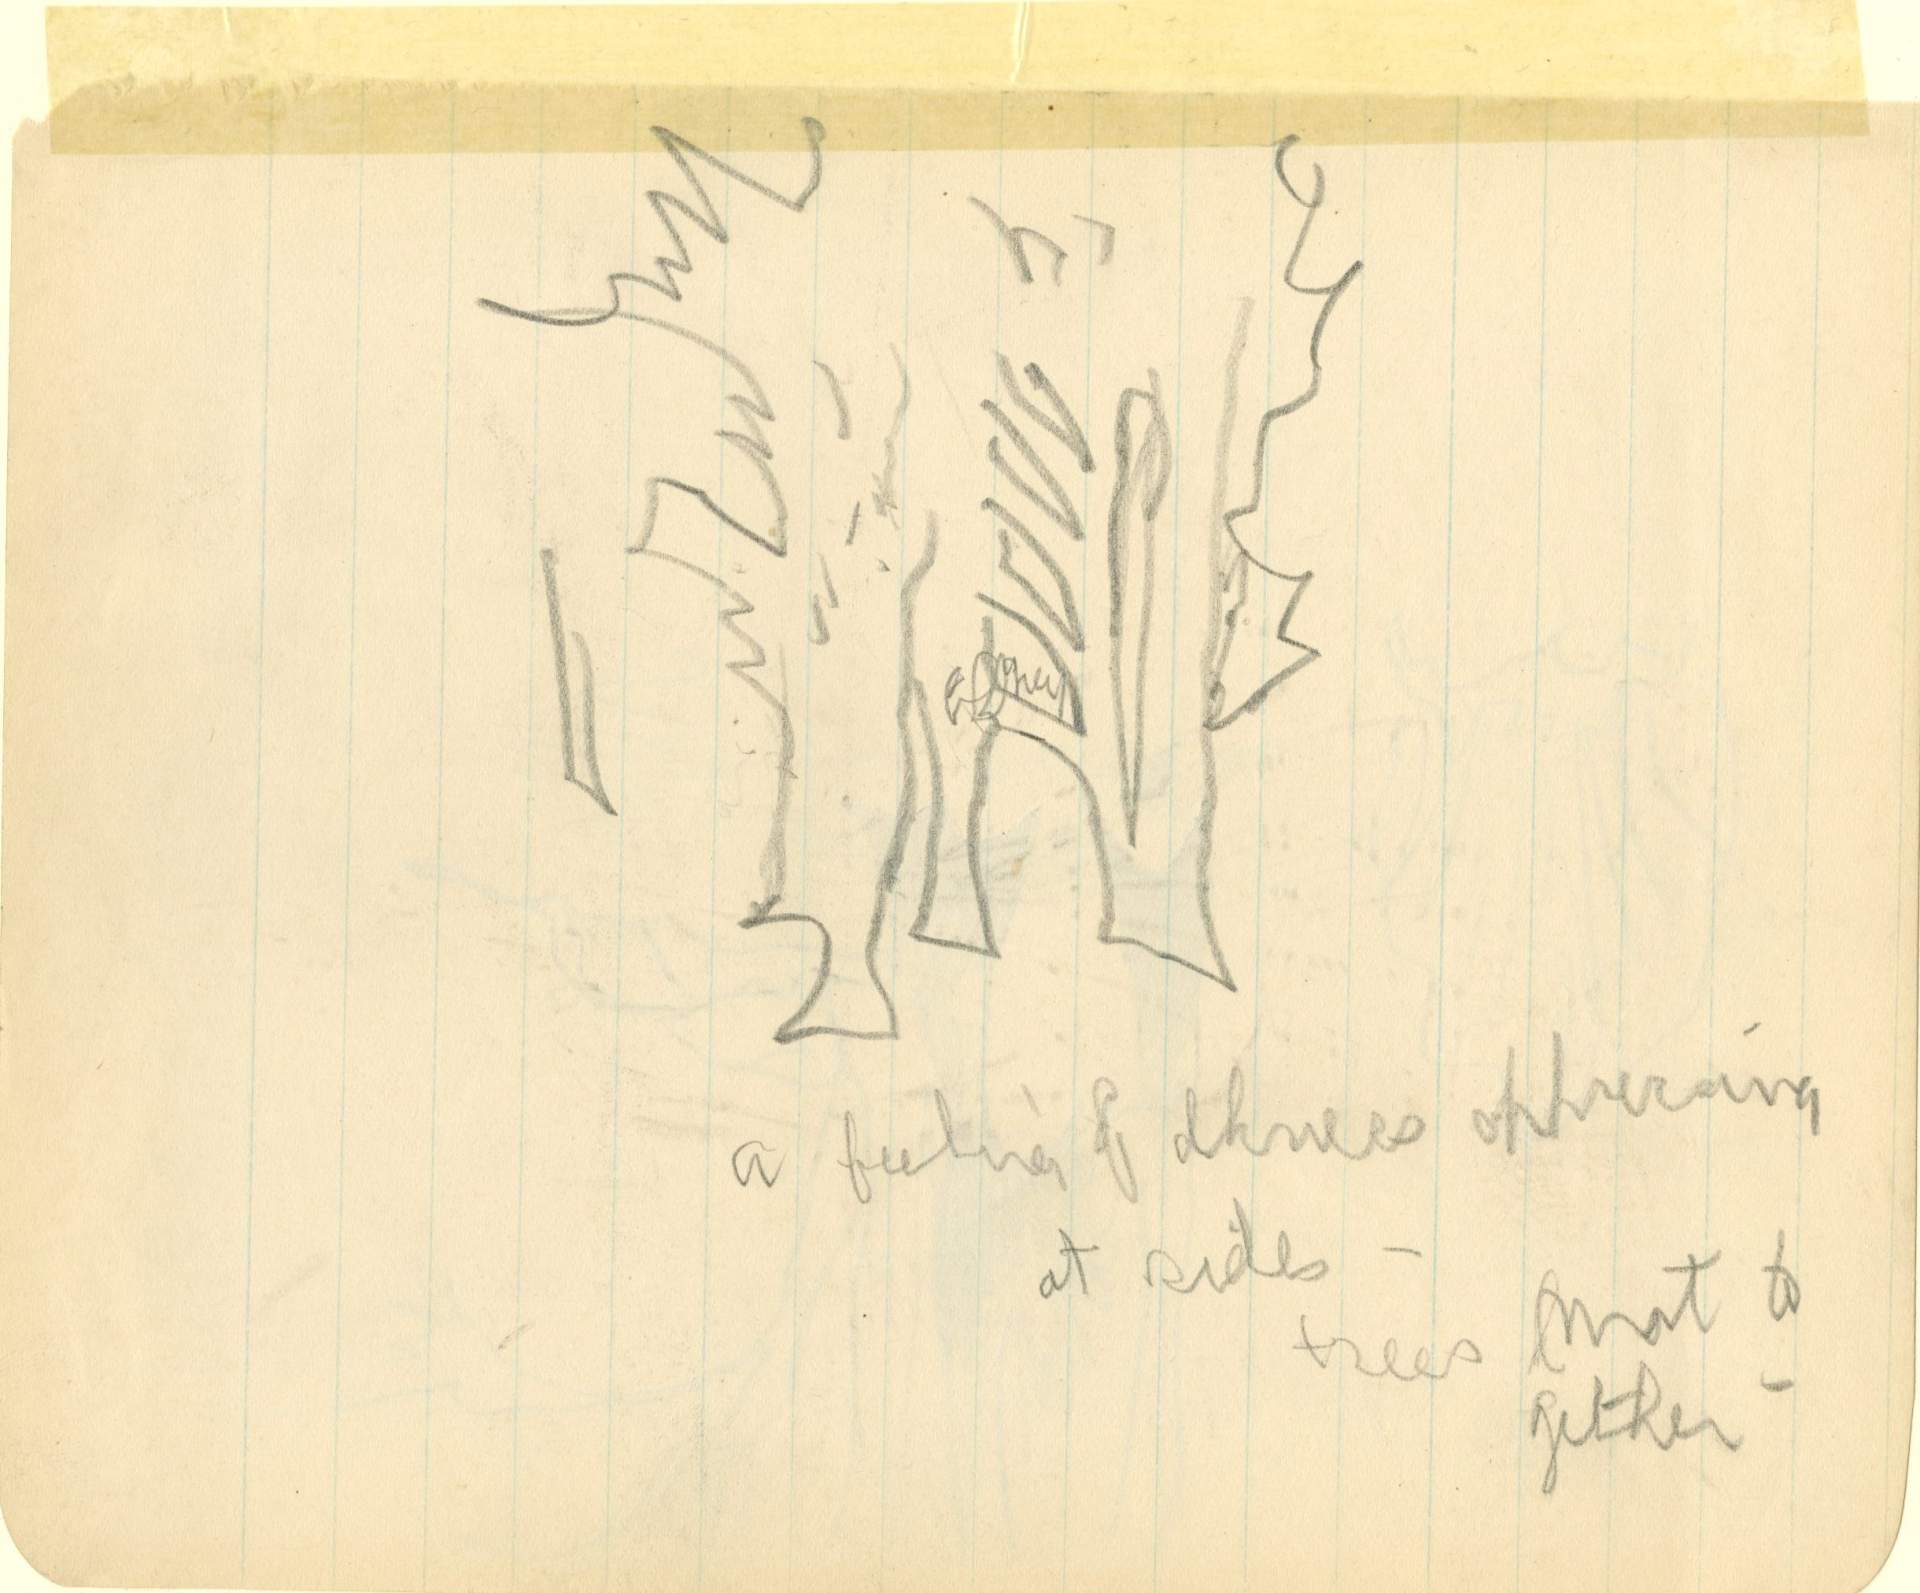 Sketch of view through trees